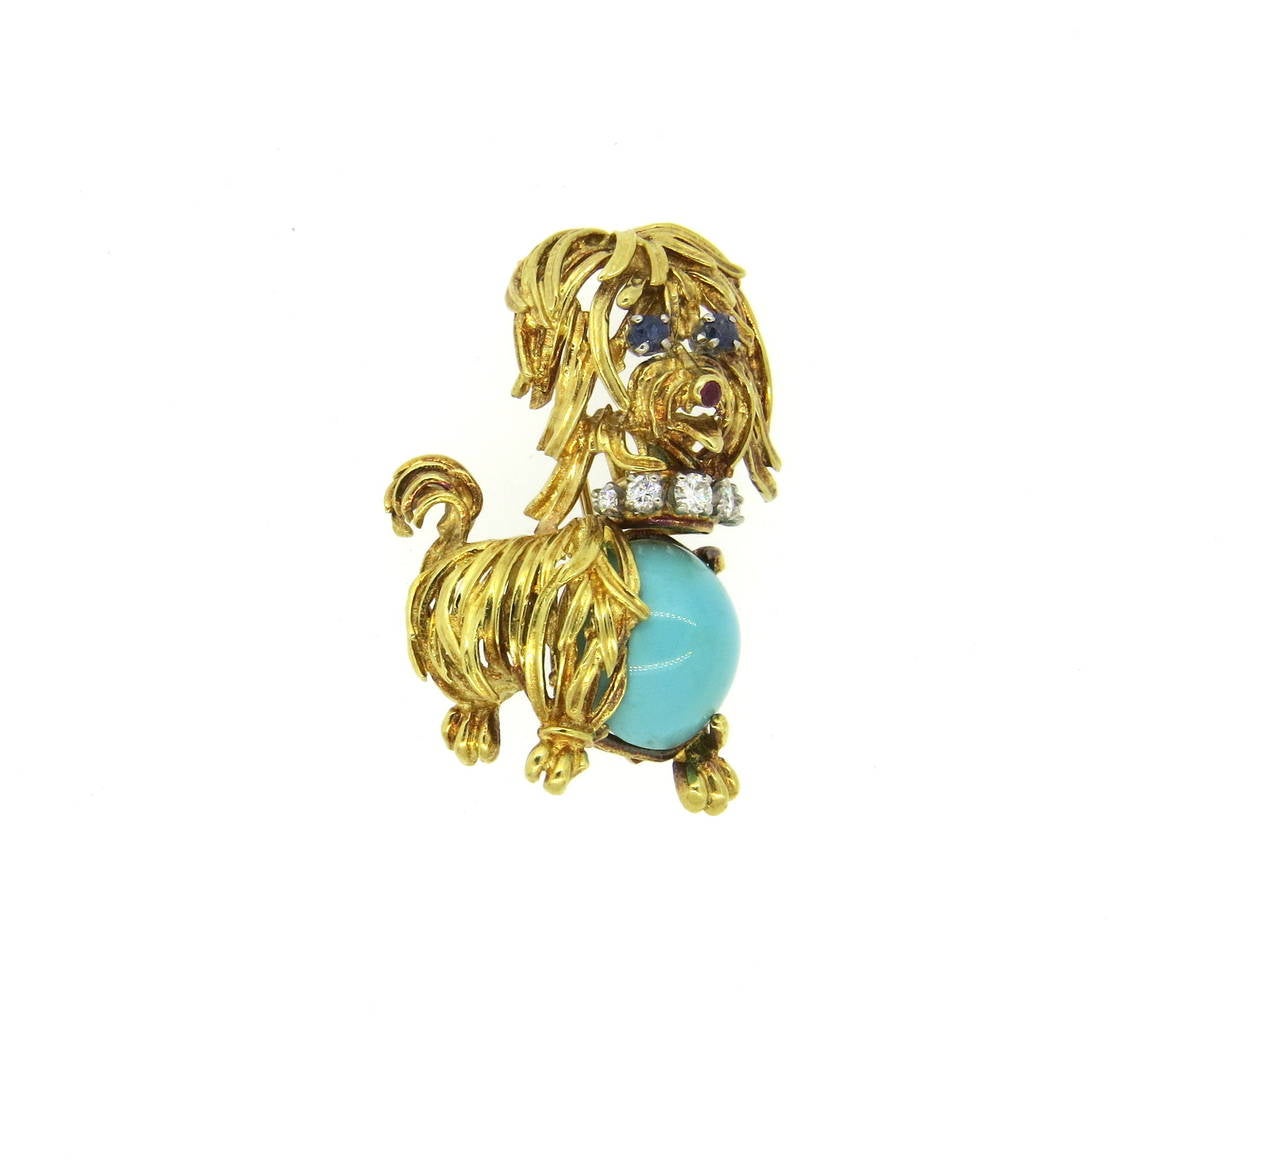 Vintage 1960s 18k gold brooch, depicting a dog, set with turquoise, sapphire eyes, ruby nose and diamond collar. Brooch measures 40mm x 21mm. Weight of the piece - 14.3 grams